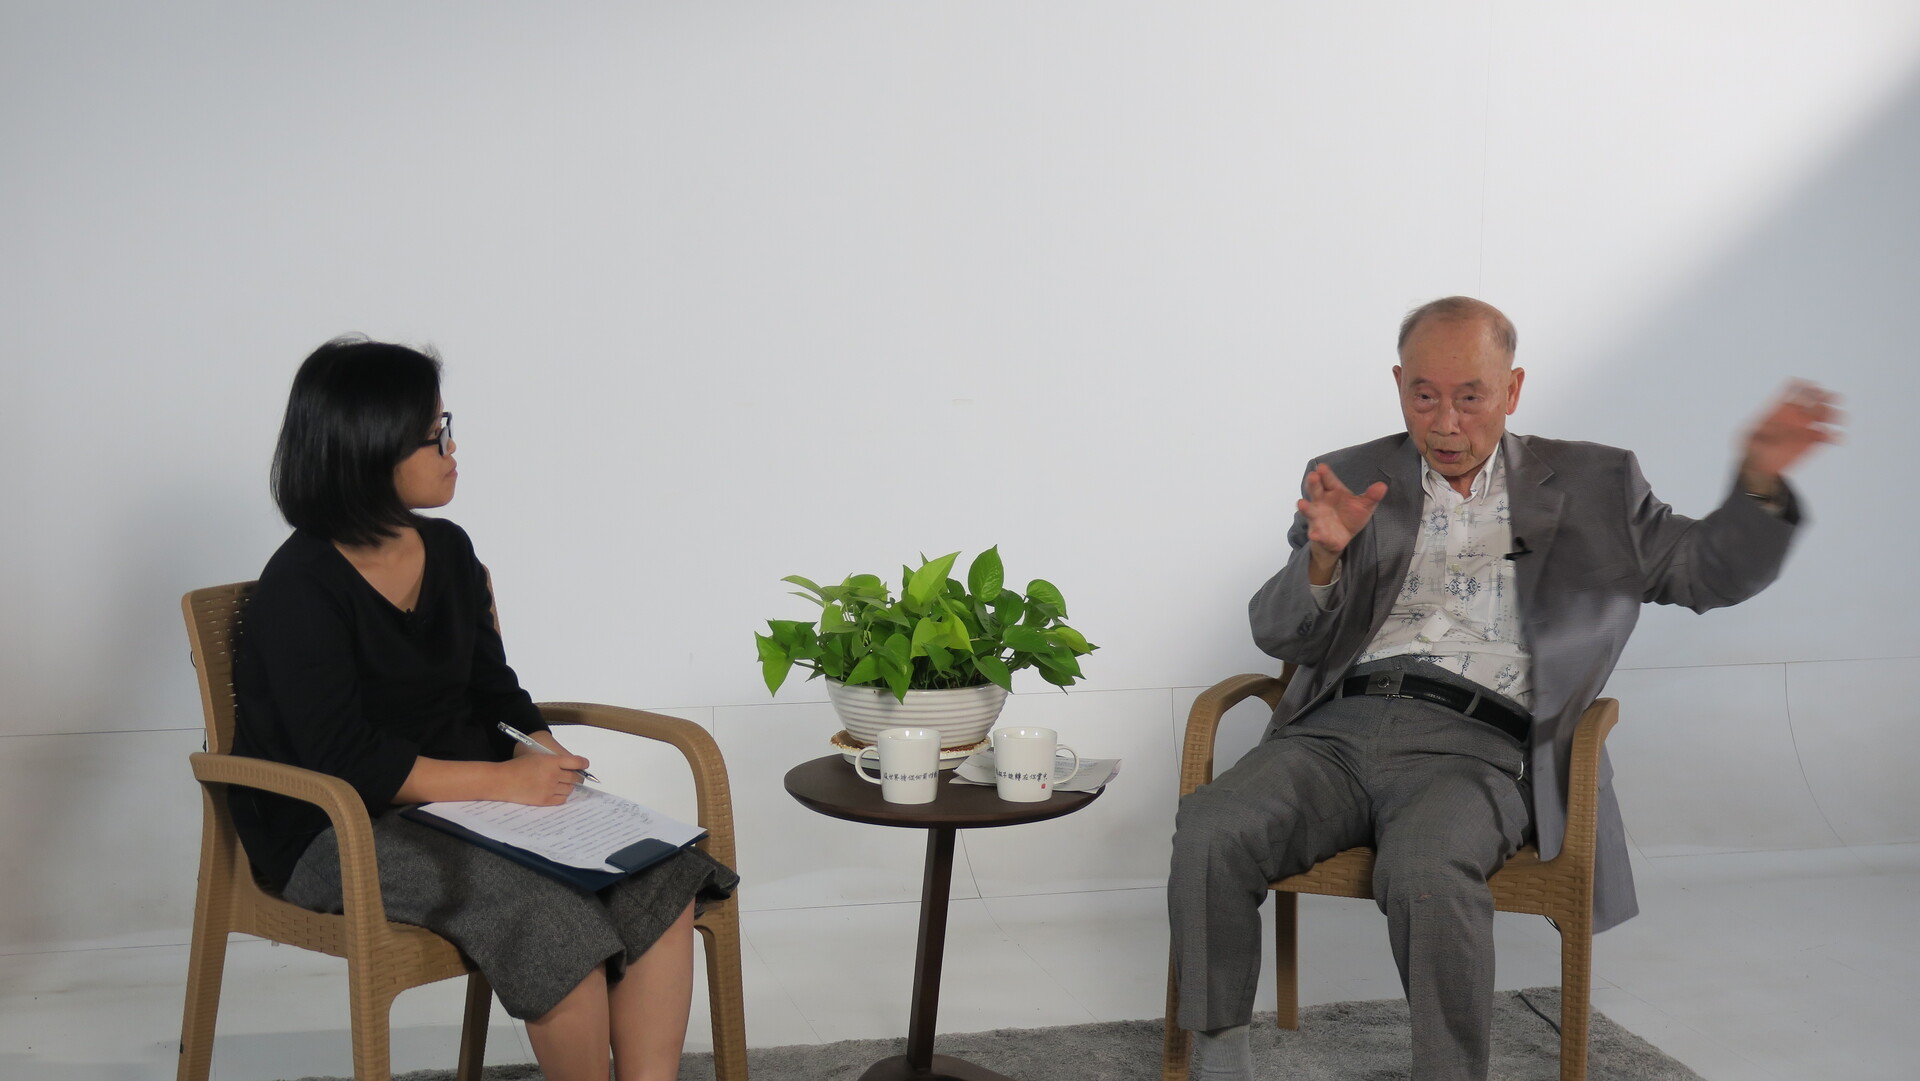 Associate Professor Chia-Lun Tu of NSYSU Department of Chinese Literature (on the left) moderated the lecture and interviewed Li Jen-kuei.